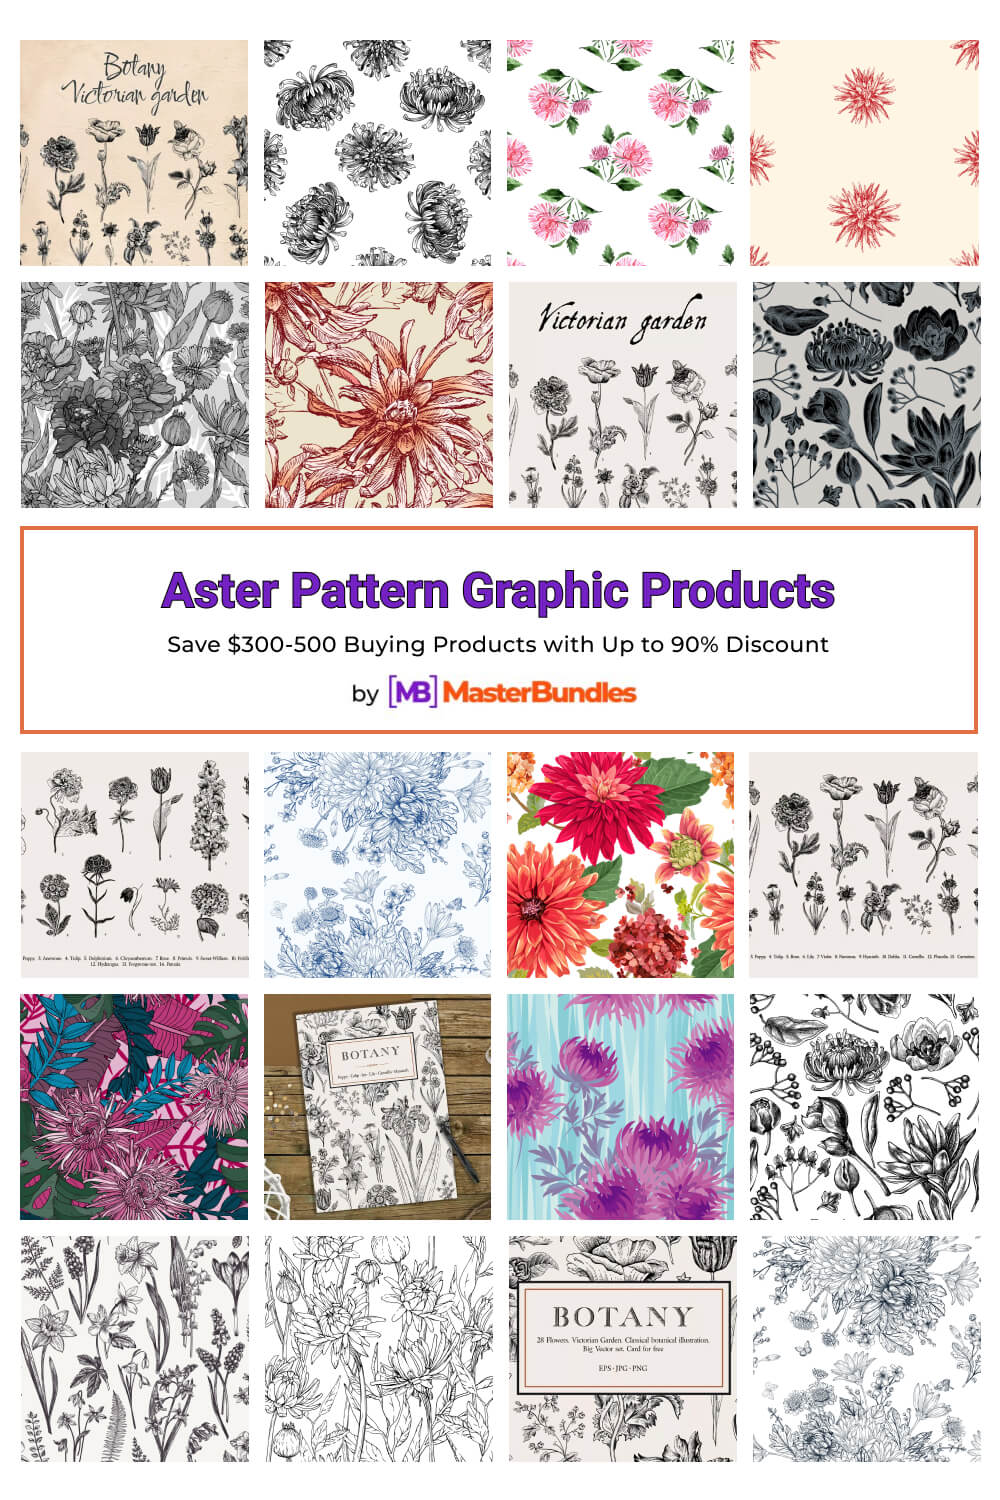 aster pattern graphic products pinterest image.